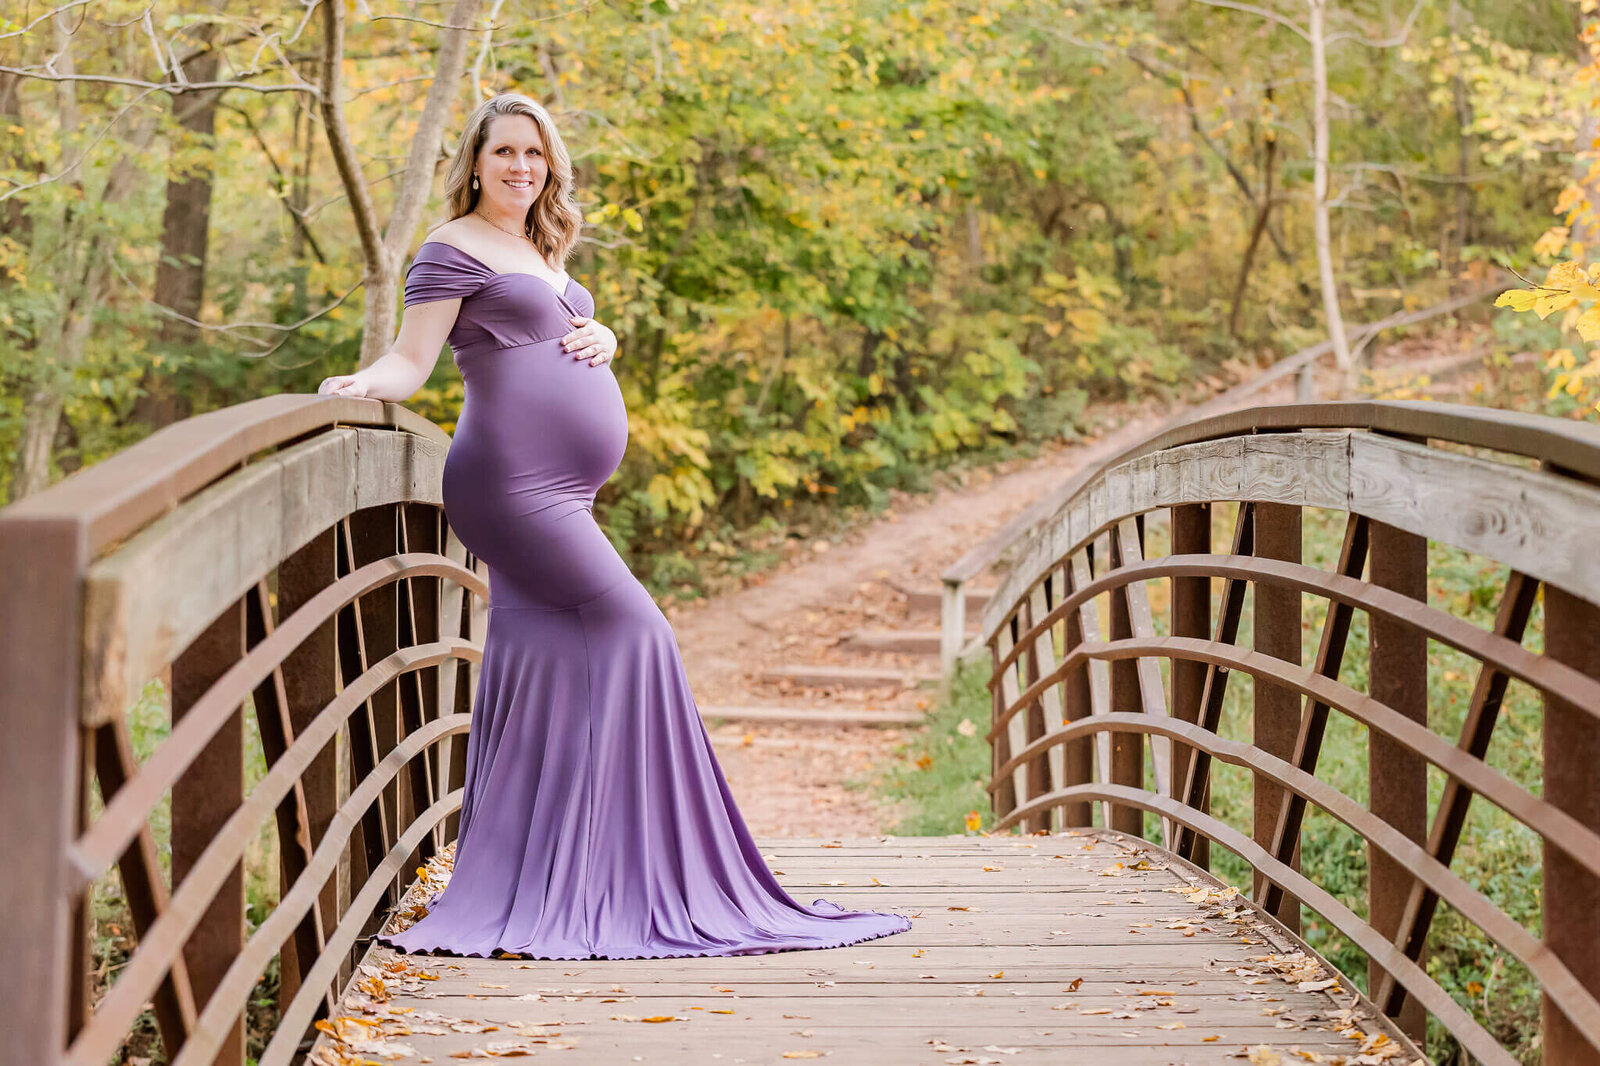 A maternity portrait of a woman in a purple dress in a park.